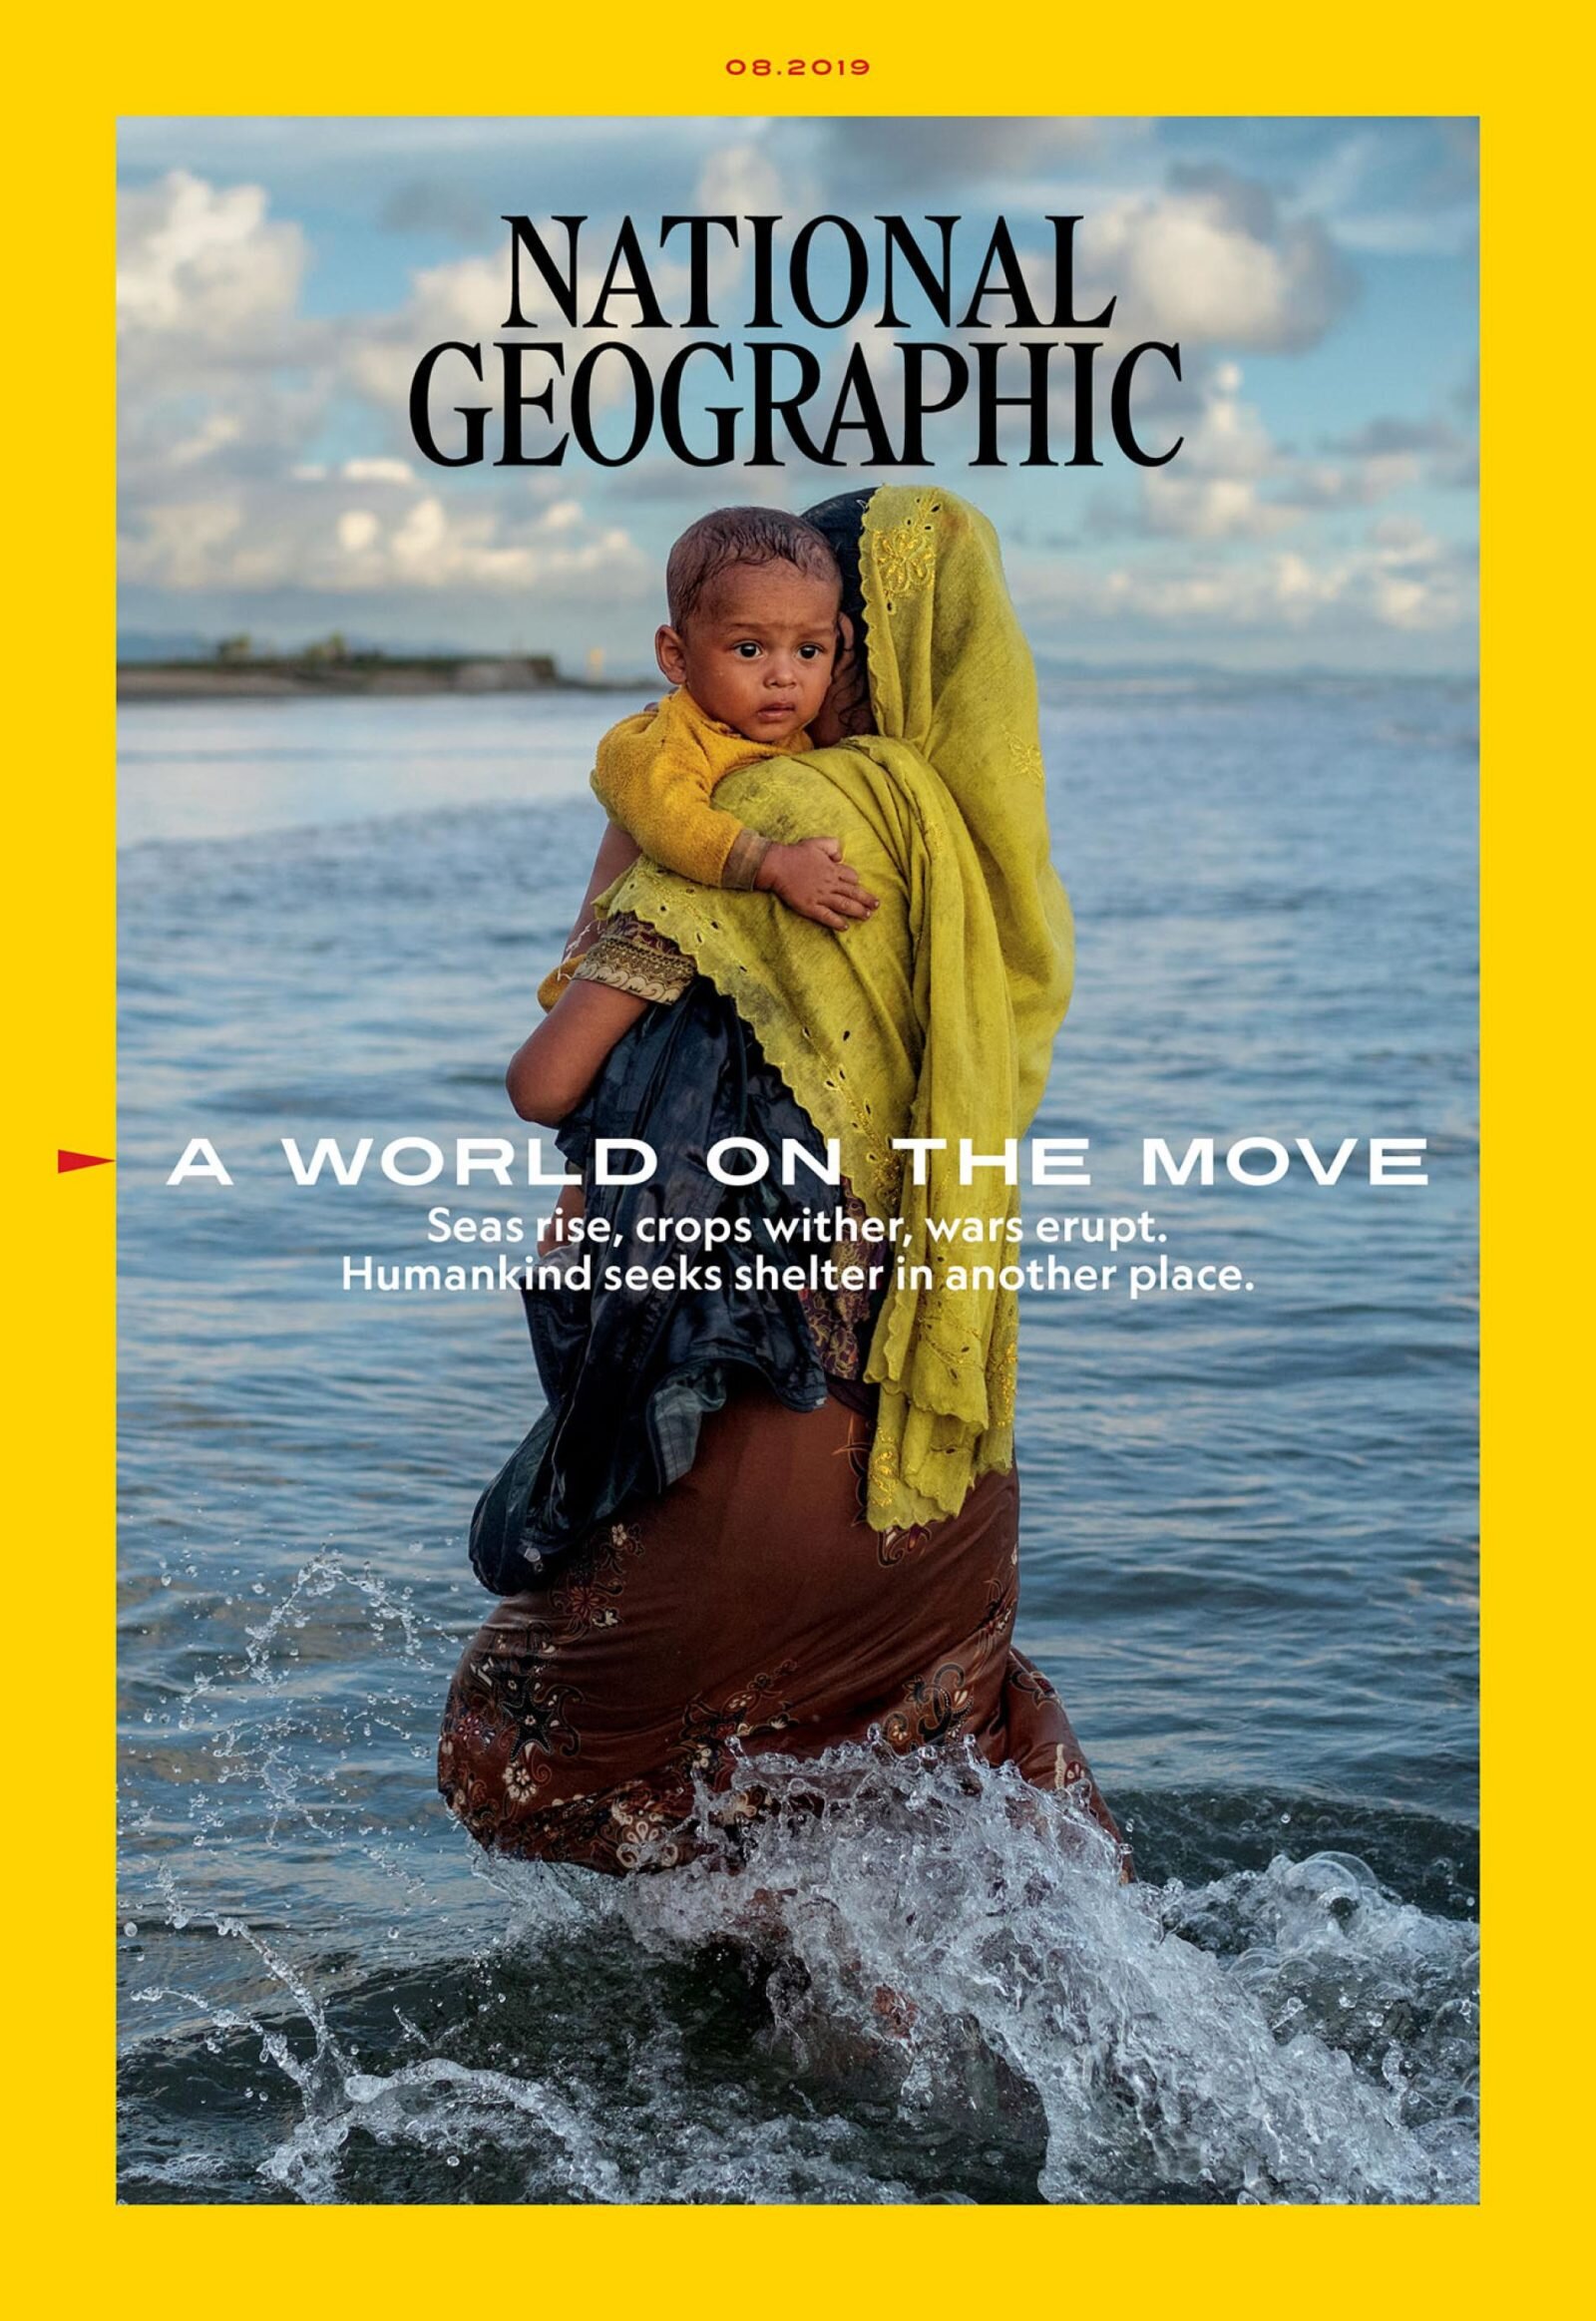 national-geographic-magazine-august-2019-migration.ngsversion.1564650024413.adapt_.1900.1.jpg